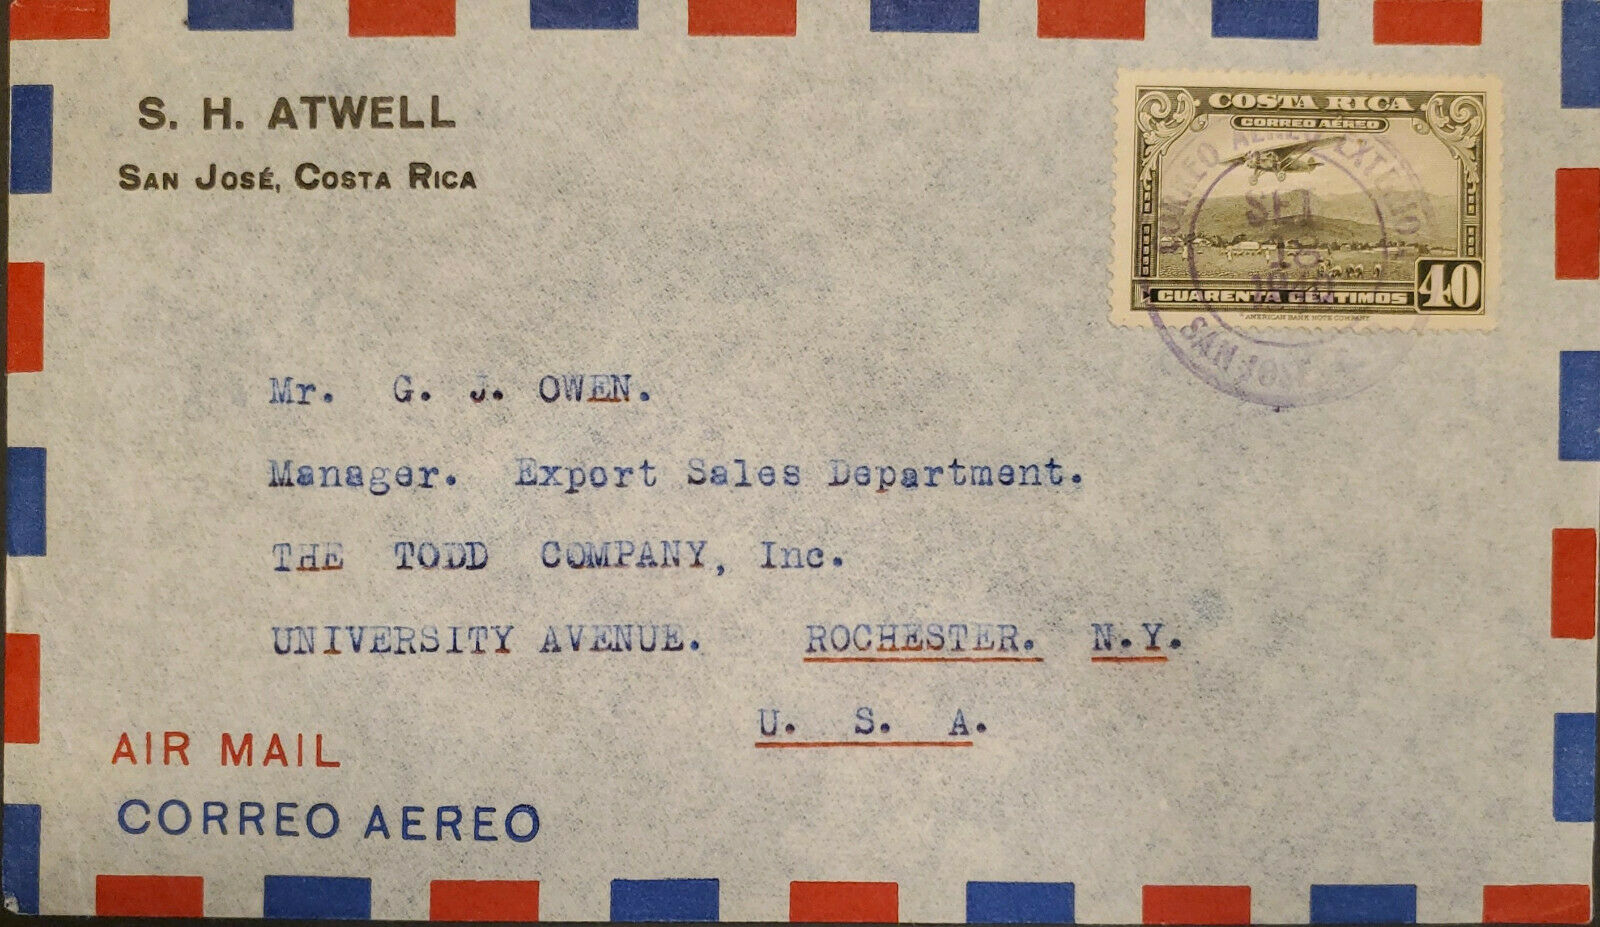 L) 1940 Costa Rica, Mail Plane About To Land, Airplane, 40 Cents, Airmail, Circu